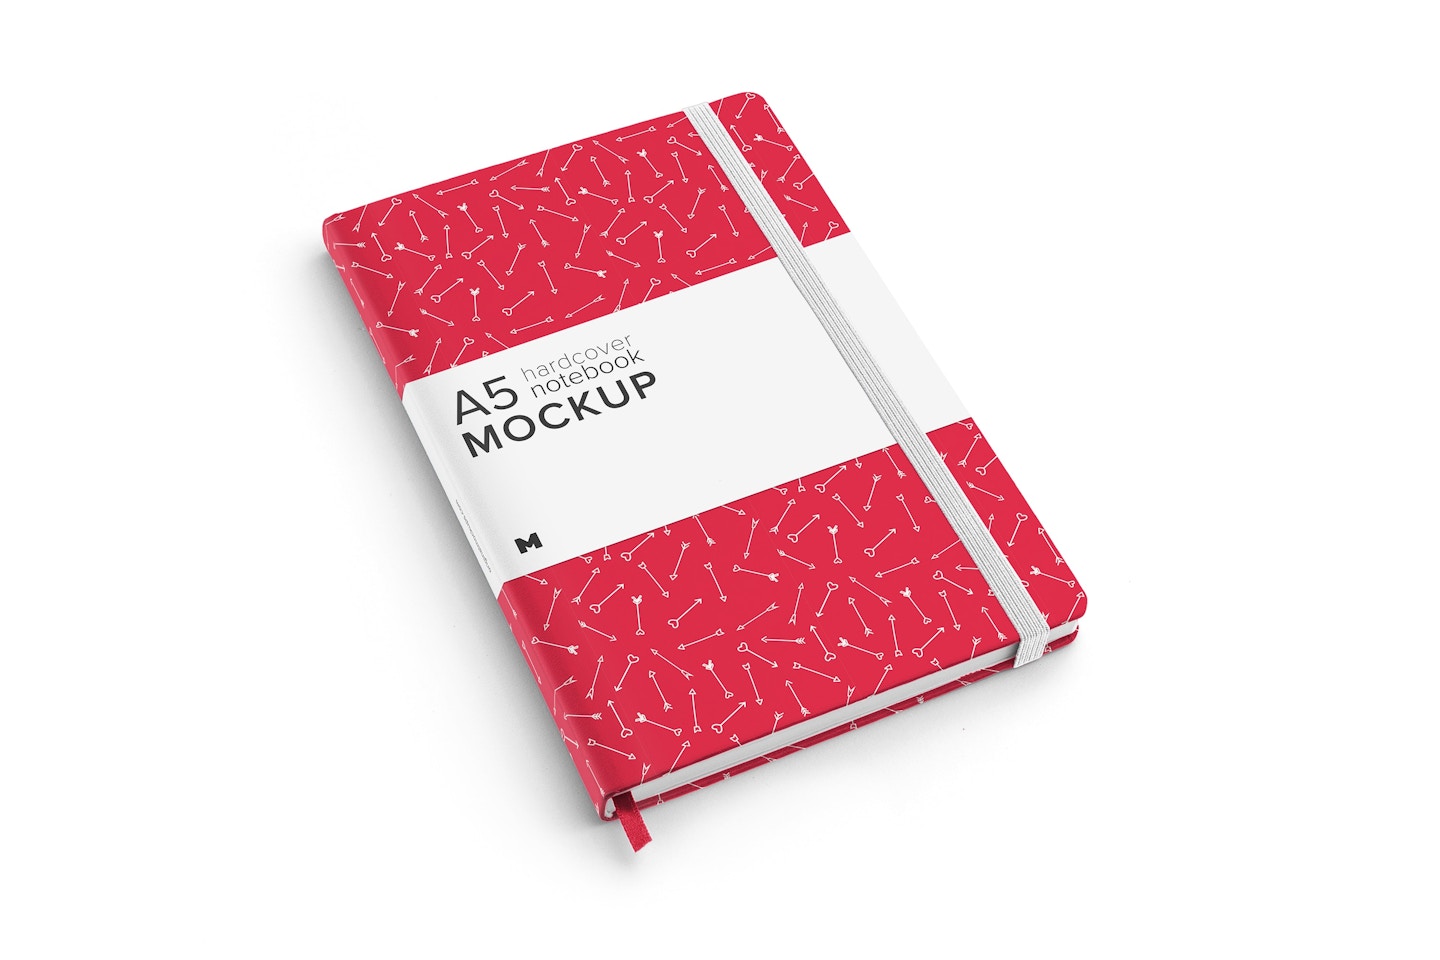 A5 Hardcover Notebook Mockup 01